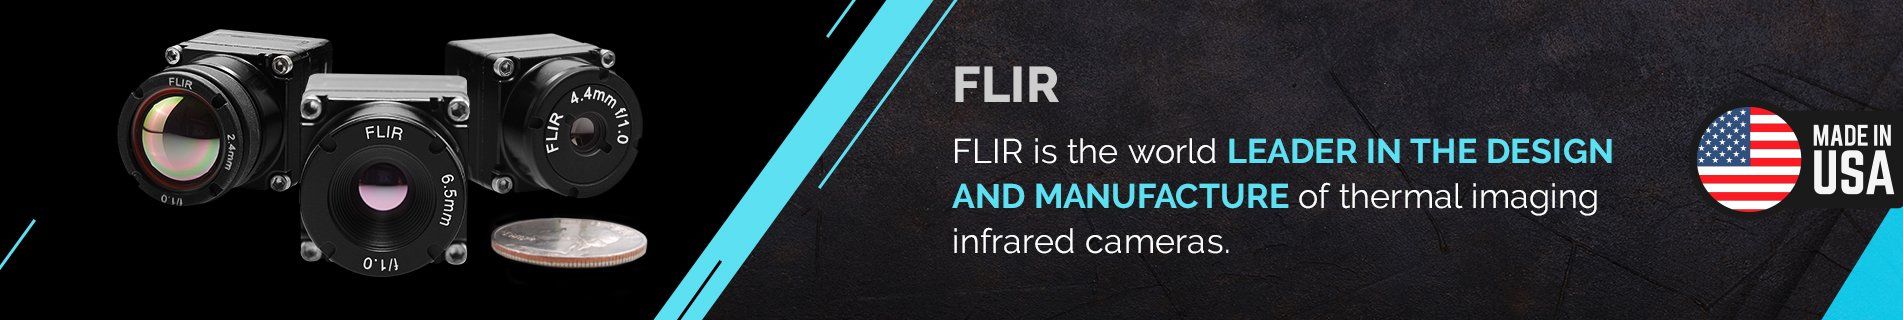 Flir Thermal Cameras | Free US Shipping | Secure Payment